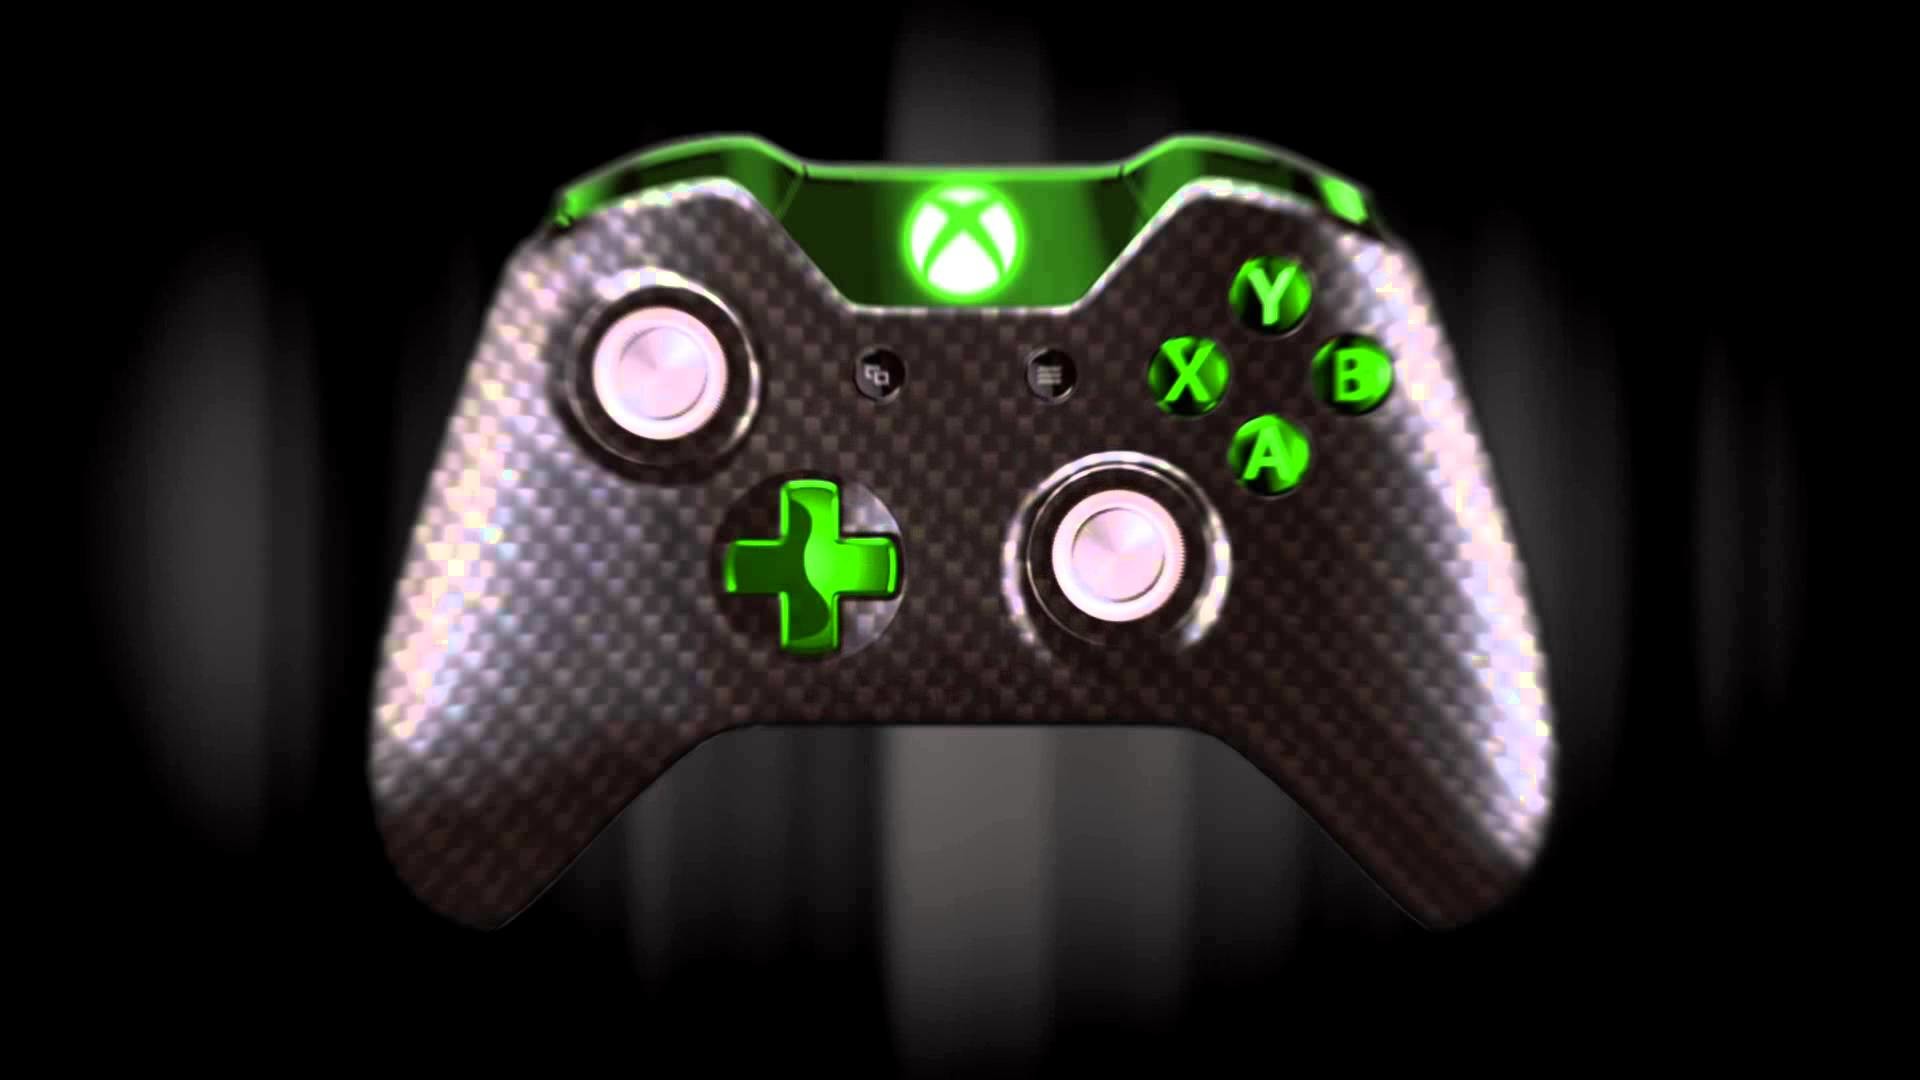 Modded Xbox One Controllers – Presented by Evil Controllers